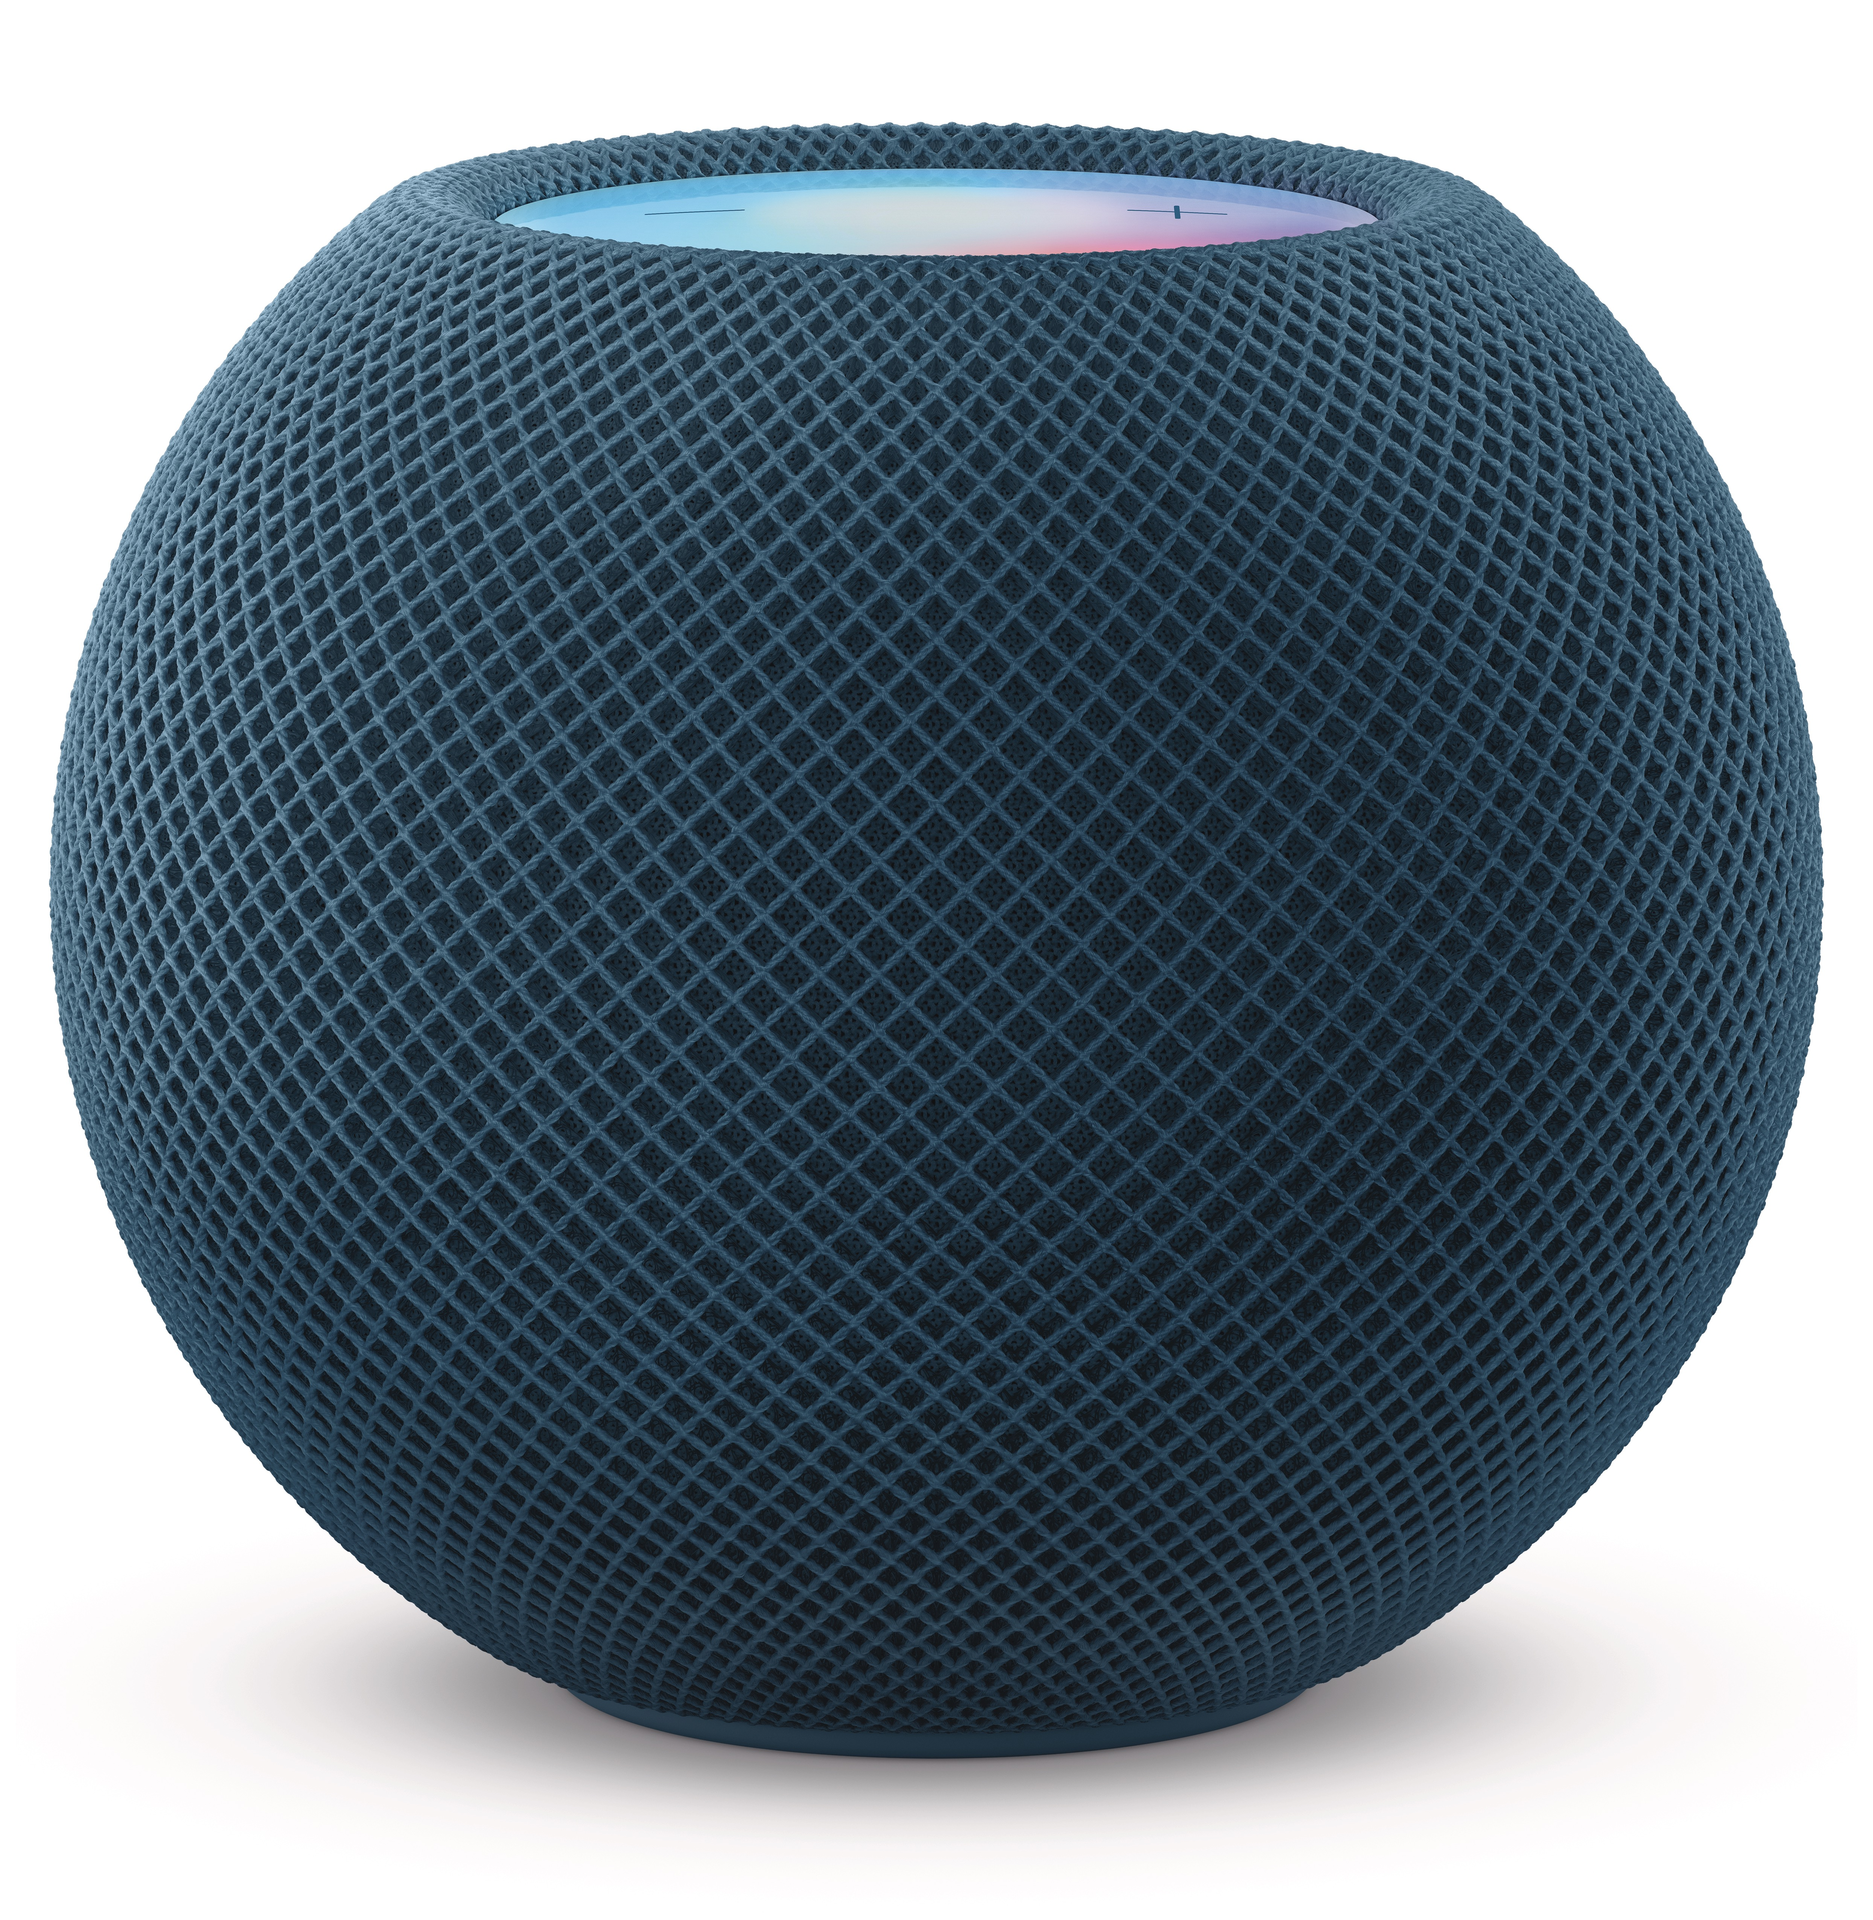 Apple HomePod Mini Renders & HomePod 2 Concept. Thoughts? : r/HomePod